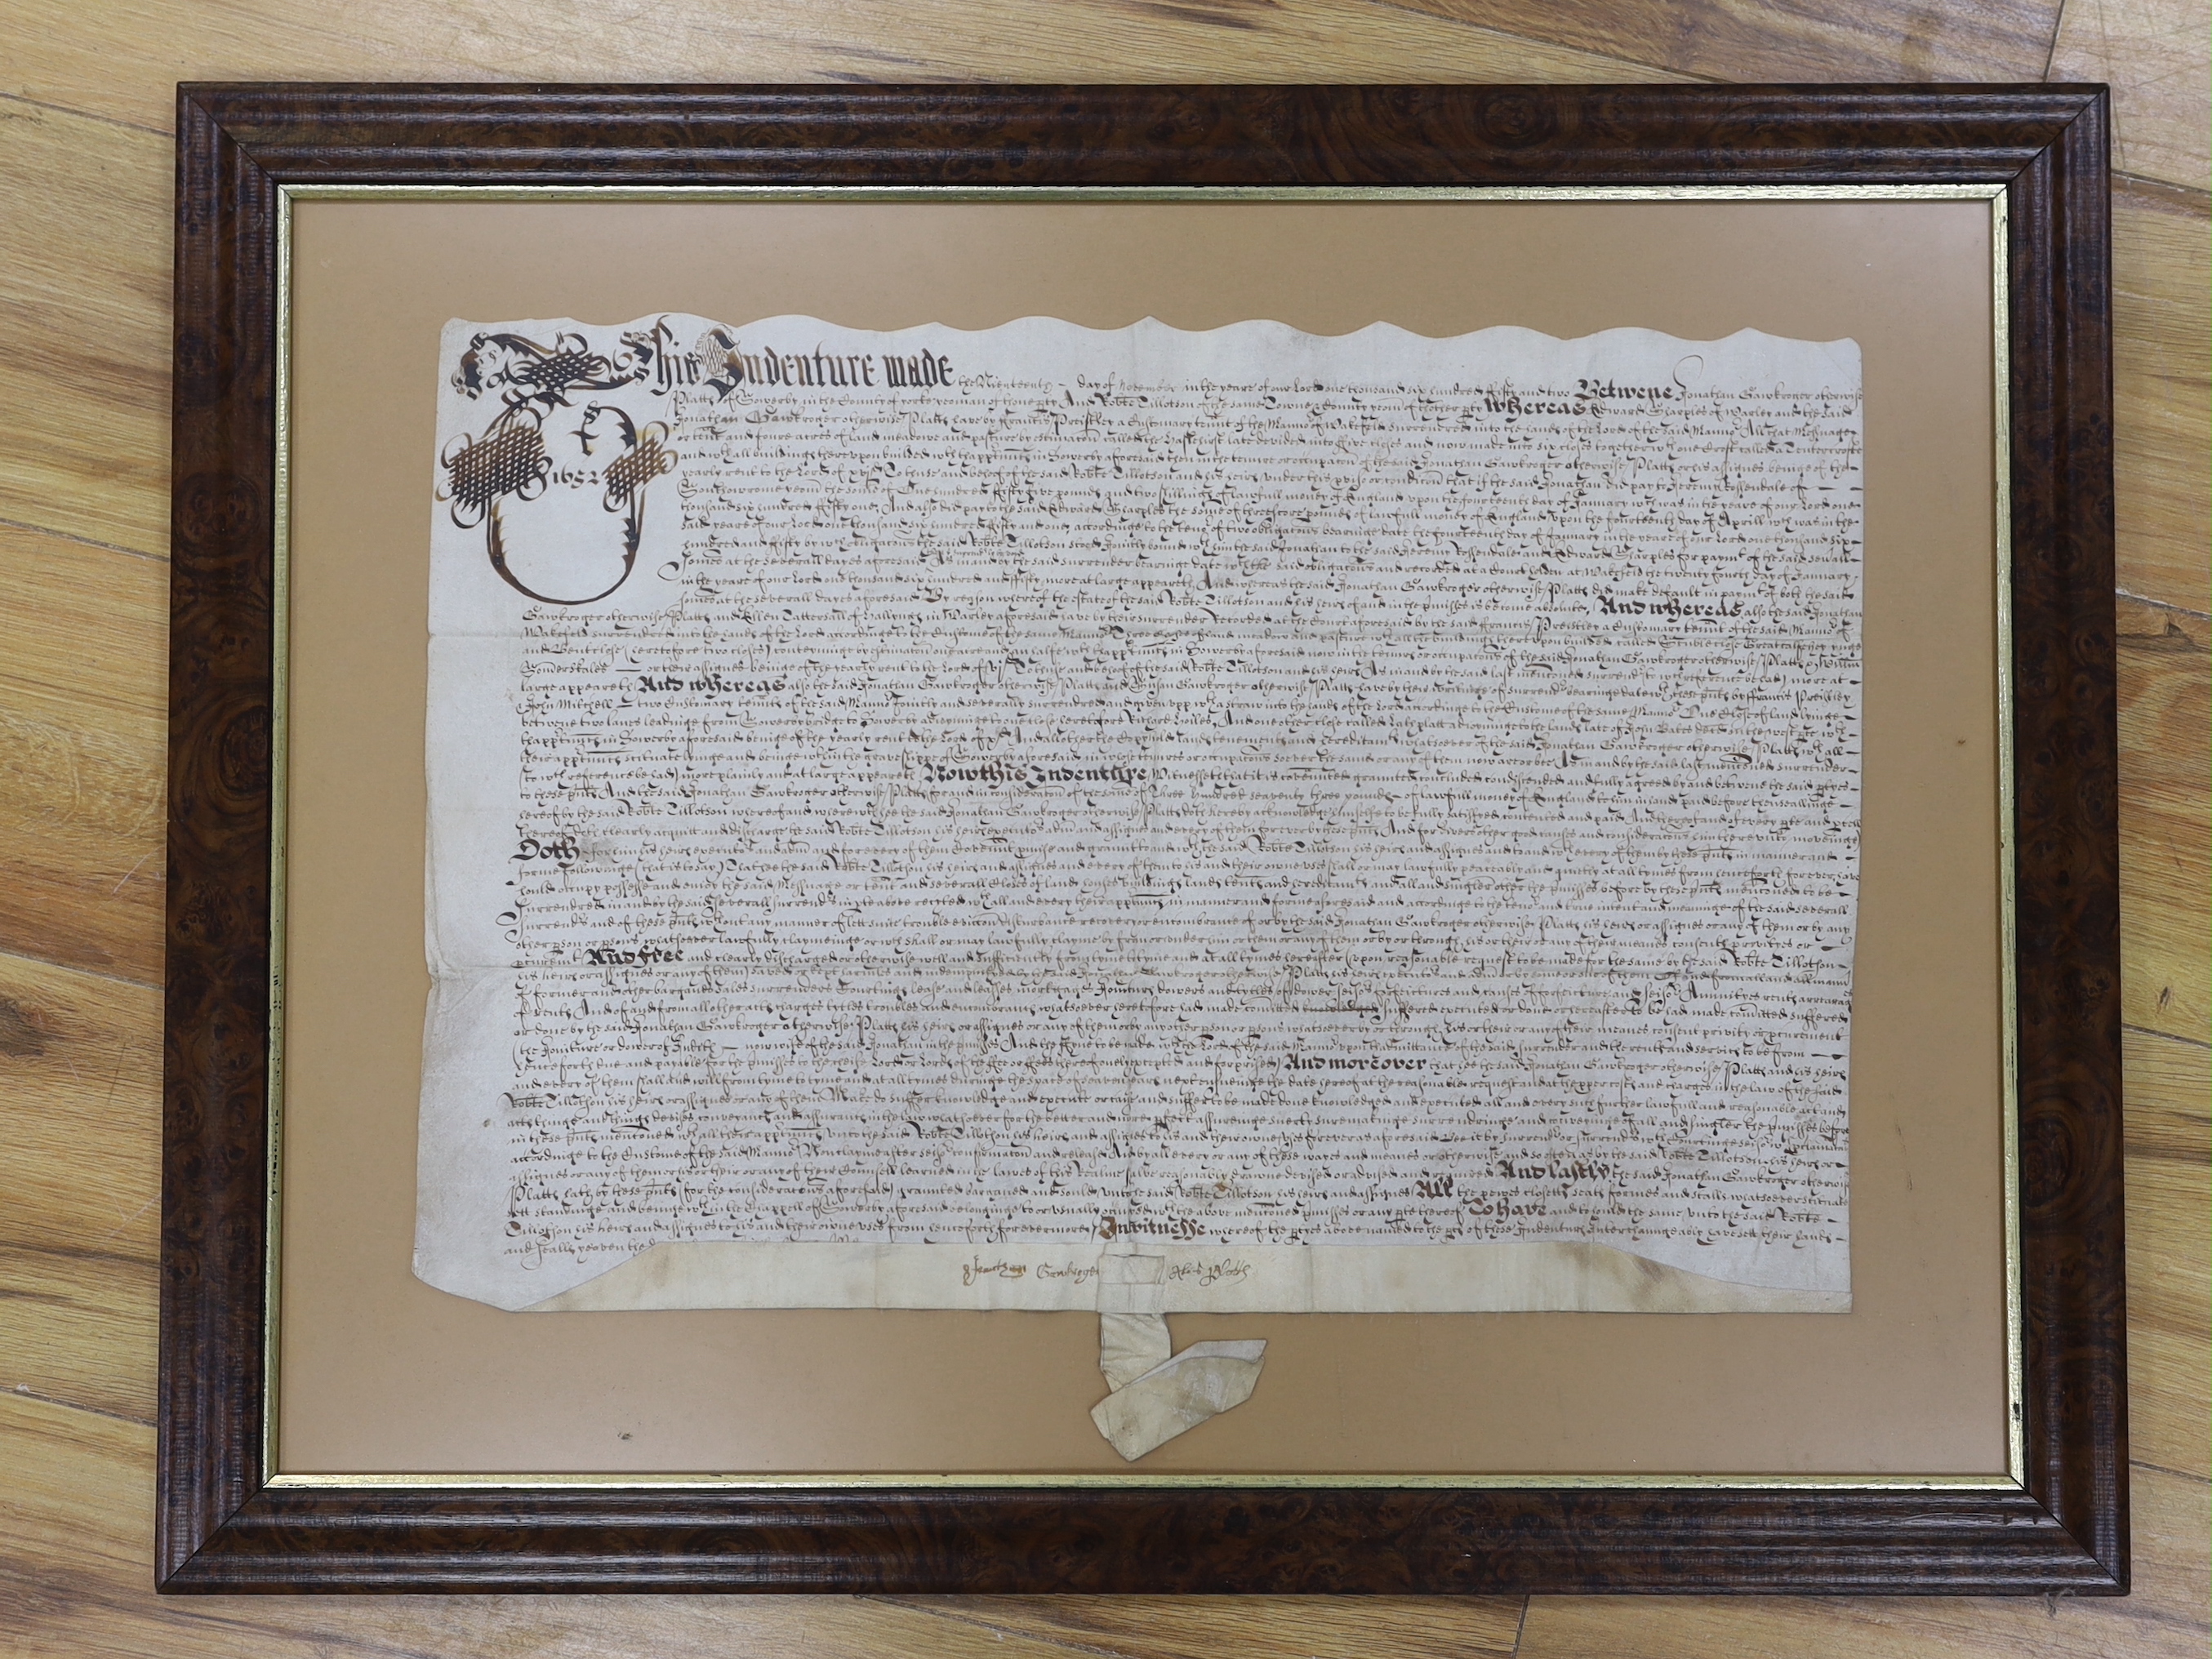 A Commonwealth period vellum indenture, dated 1652, framed, 37 x 54cm